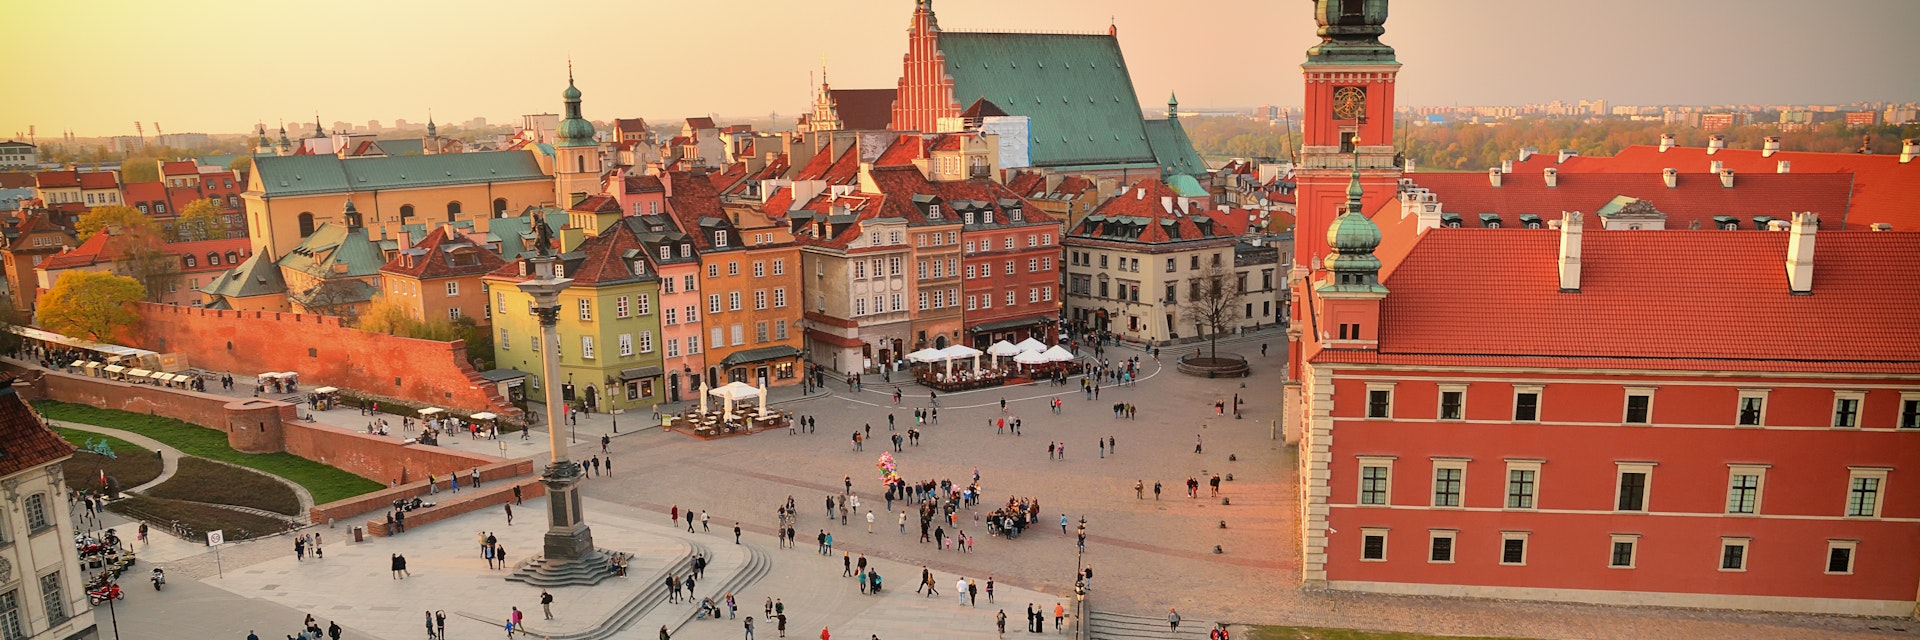 Old town in Warsaw, capitol of Poland.